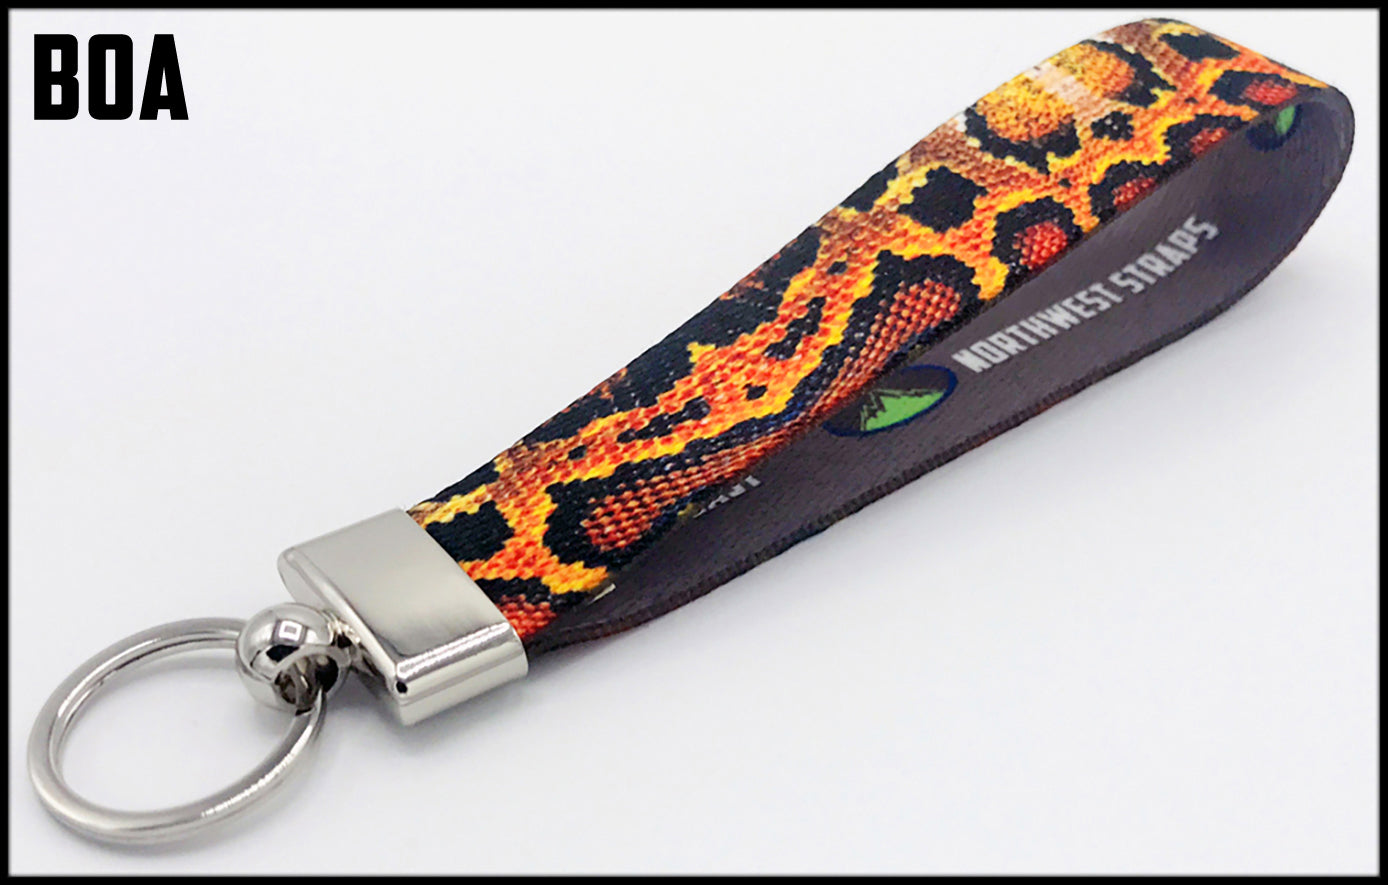 Boa constrictor snake skin 1 inch custom picture quality polyester webbing keyfob. Design by Northwest Straps.